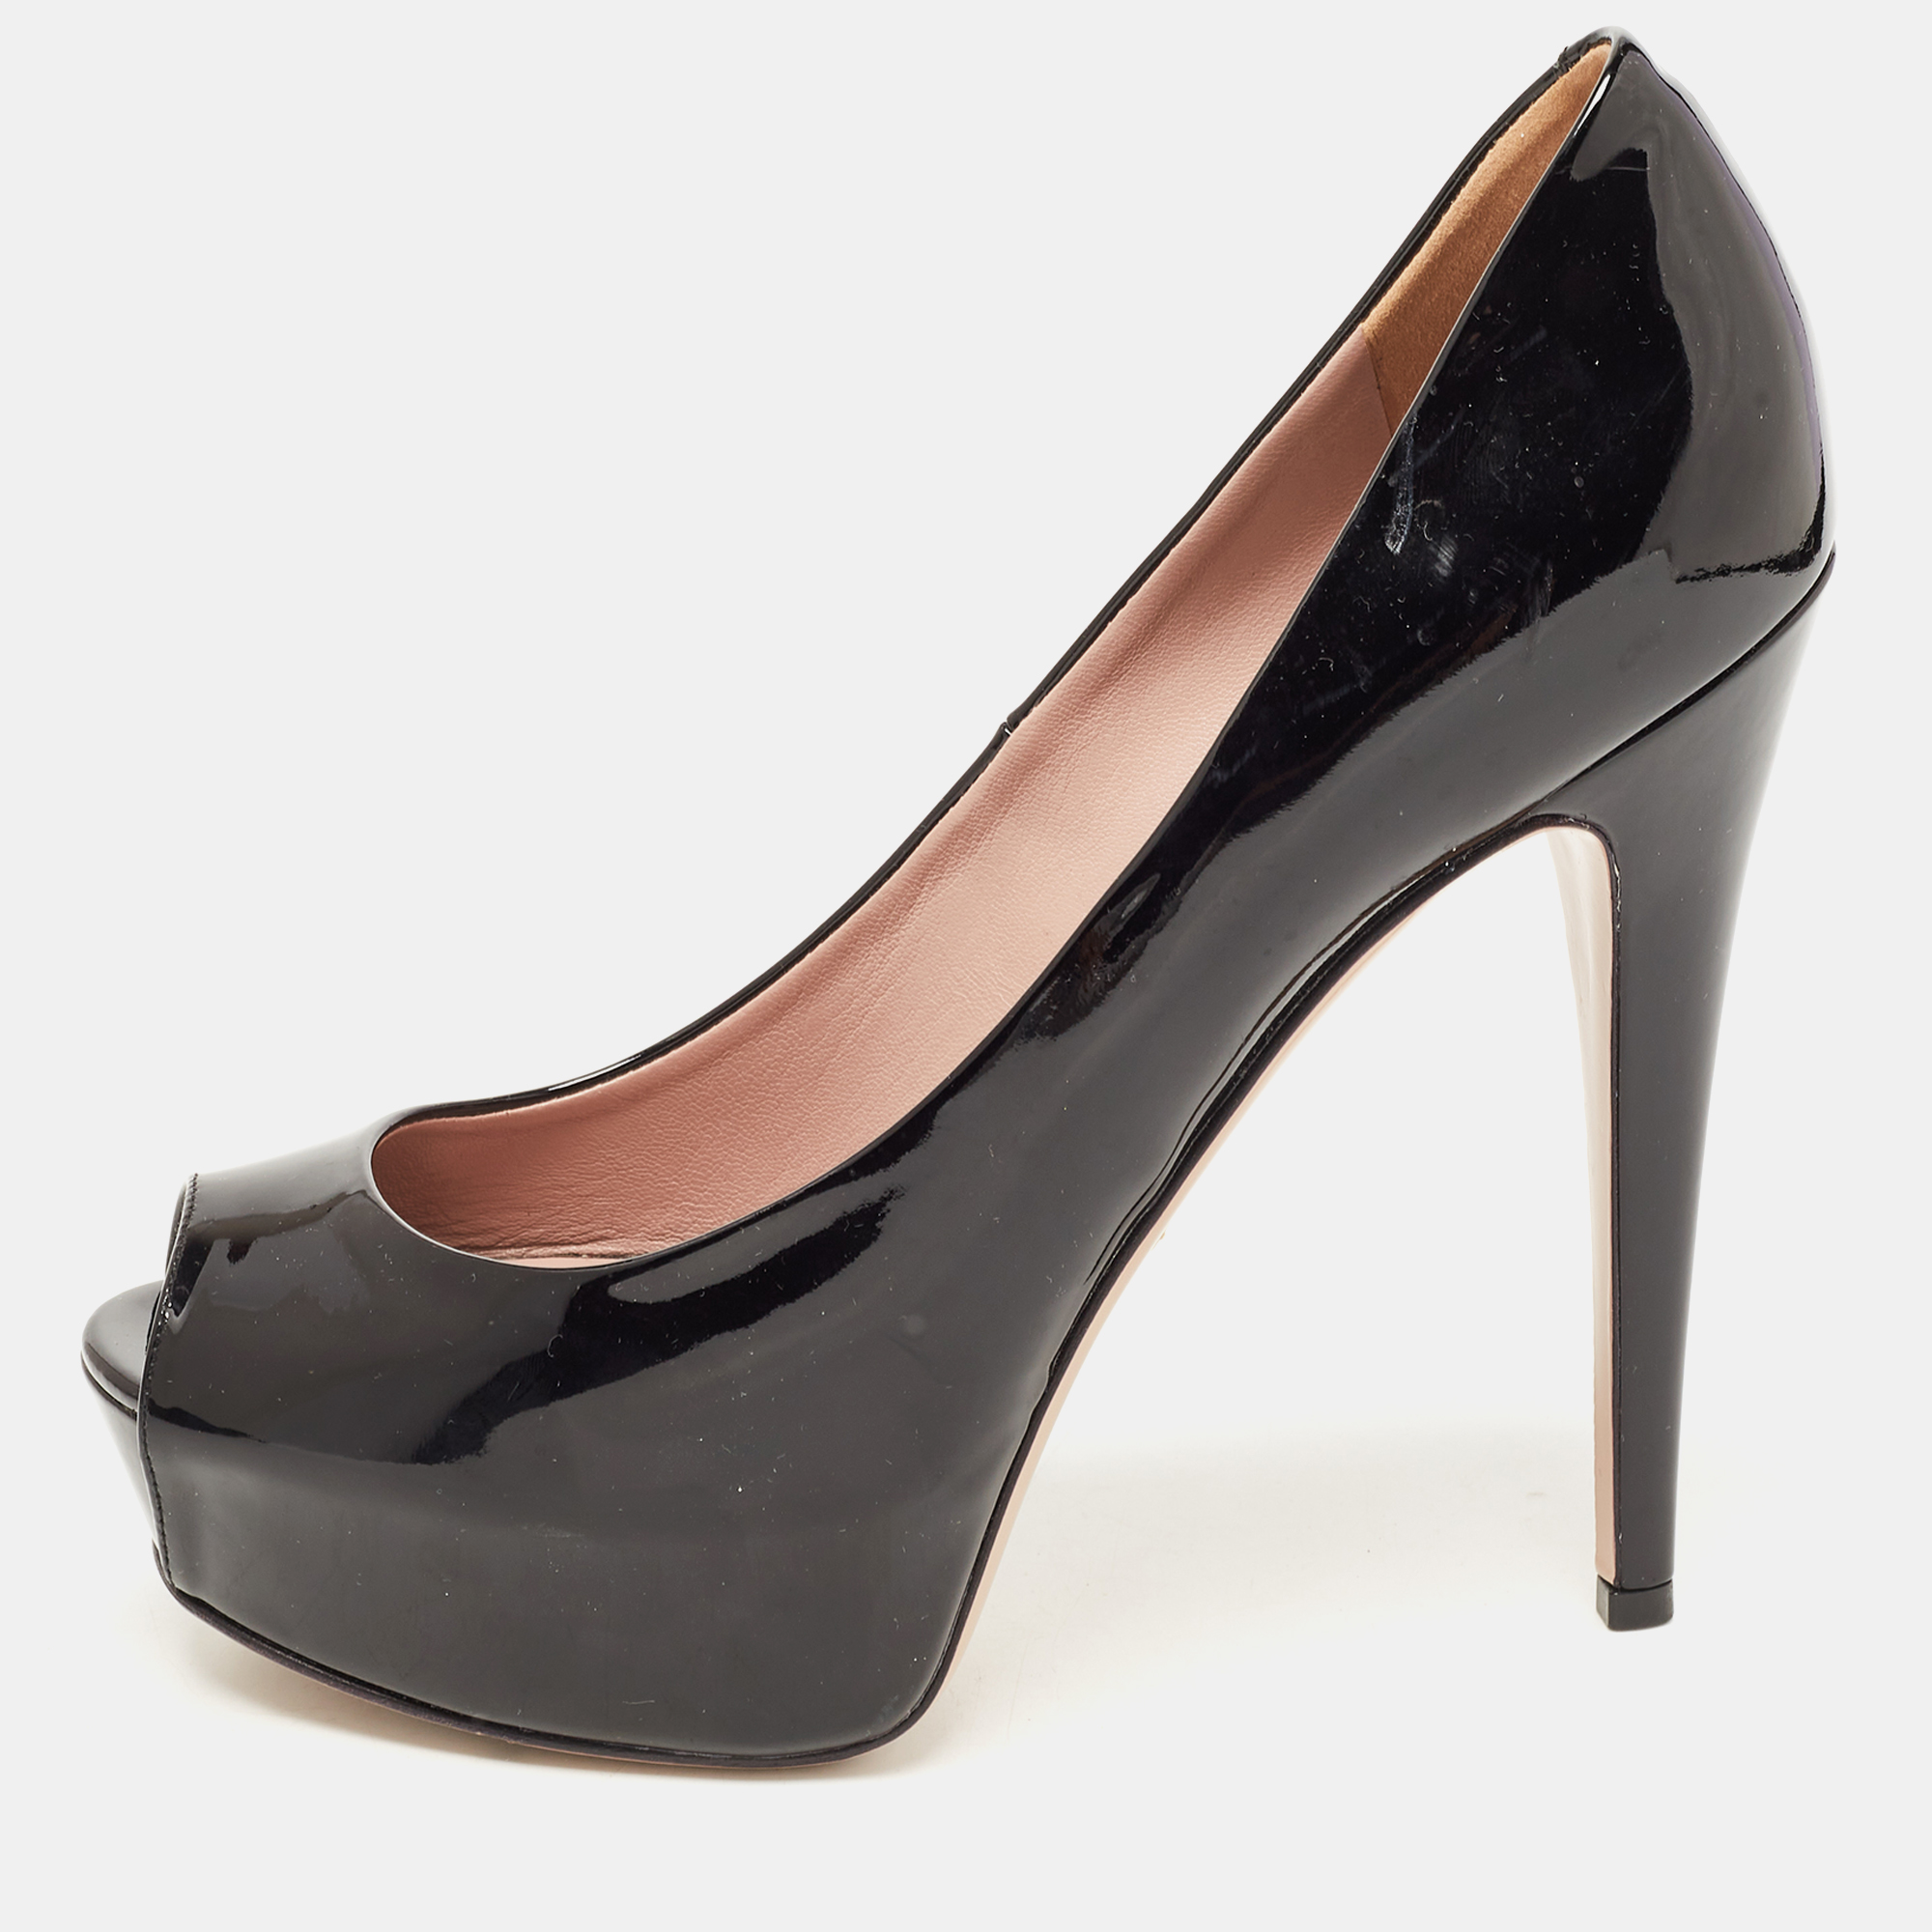 Get an elegant look with these black pumps by Gucci. Beautifully designed they flaunt peep toes platform 14 cm heels. Strike the right pose by assembling the pair with a dress or jumpsuit.